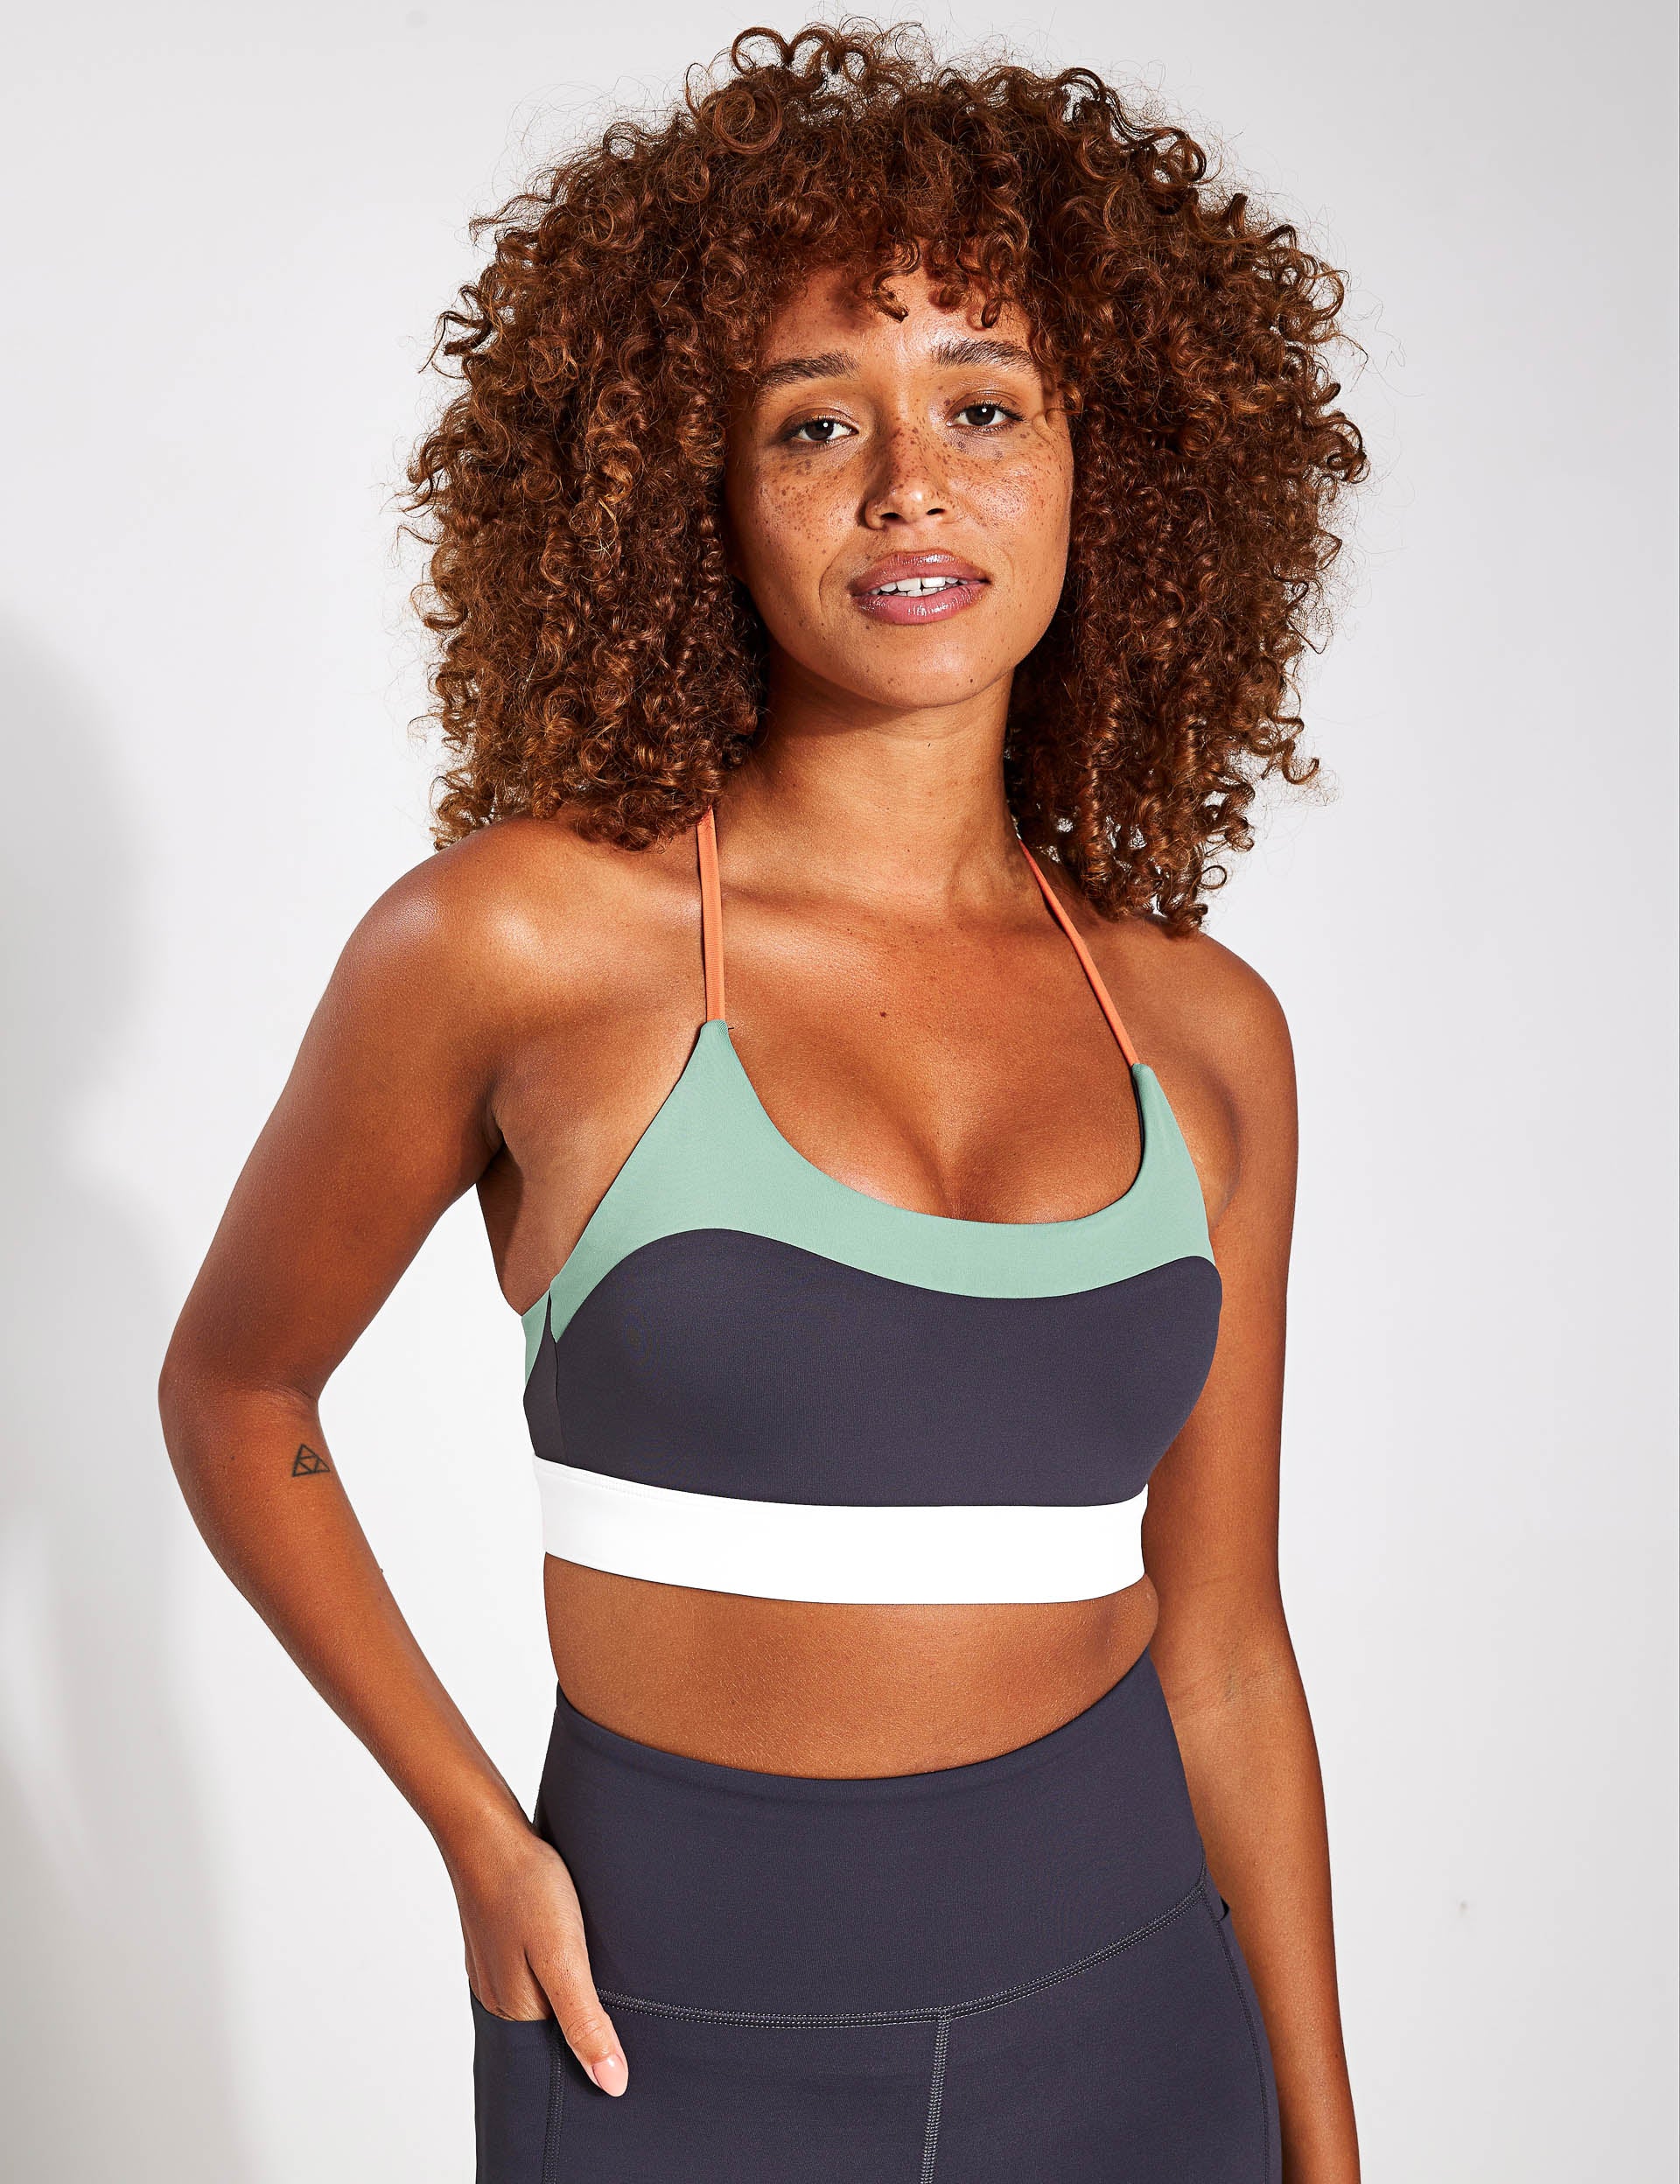 Browse Now The Latest Sports Bra Collection Online